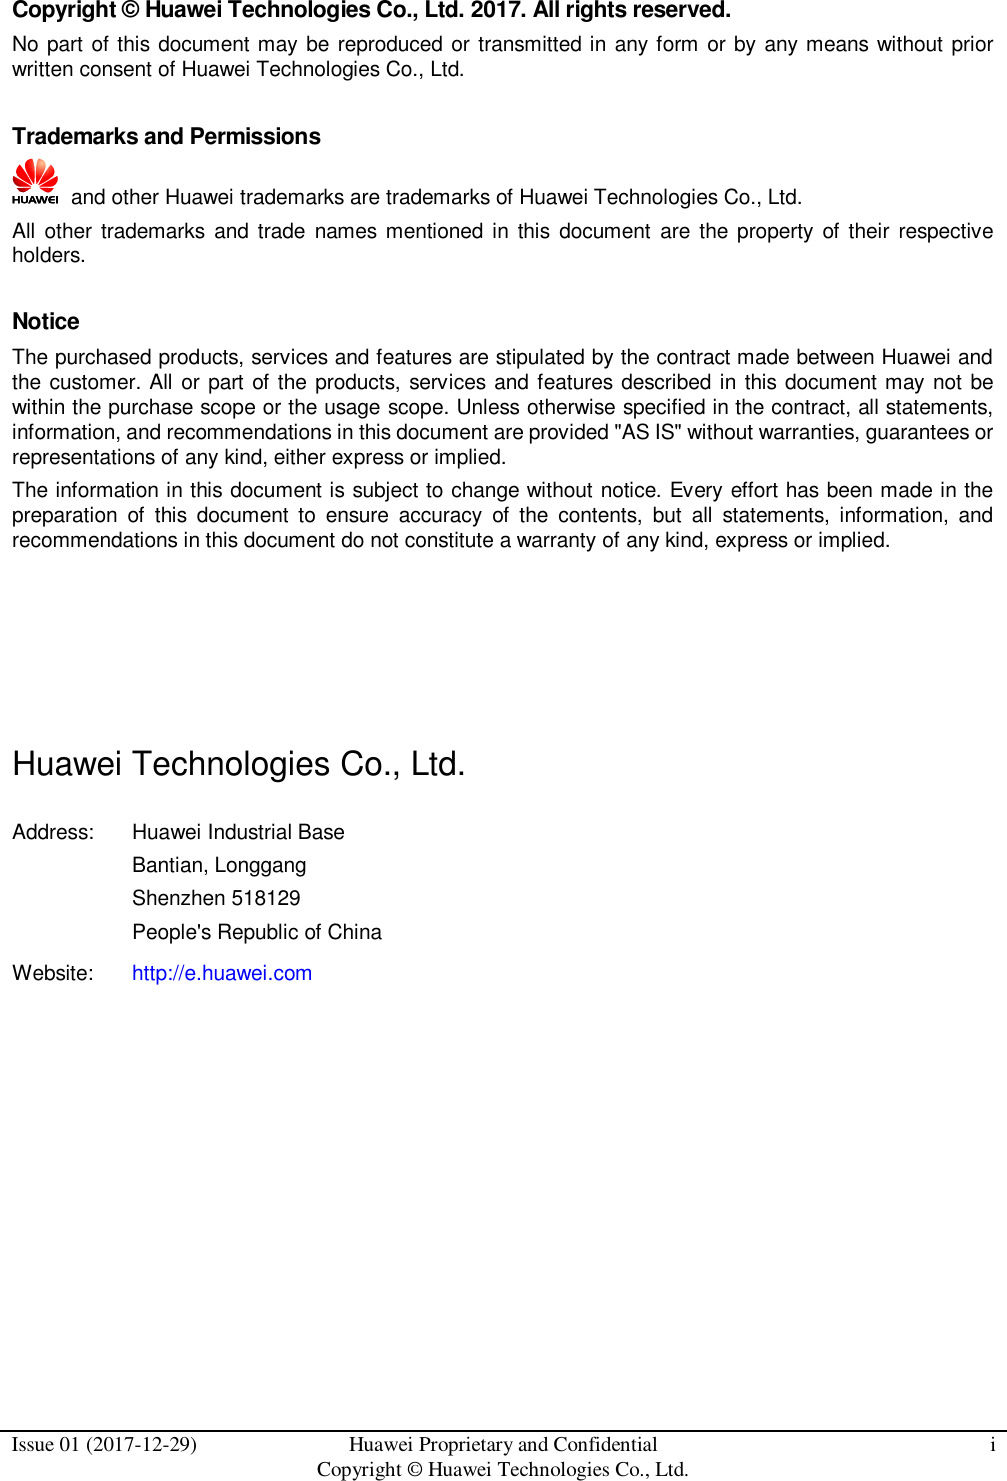  Issue 01 (2017-12-29) Huawei Proprietary and Confidential                                     Copyright © Huawei Technologies Co., Ltd. i  Copyright © Huawei Technologies Co., Ltd. 2017. All rights reserved. No part of this document may be reproduced or transmitted in any form or by any means without prior written consent of Huawei Technologies Co., Ltd.  Trademarks and Permissions   and other Huawei trademarks are trademarks of Huawei Technologies Co., Ltd. All  other trademarks and trade names mentioned in this document  are  the  property  of their  respective holders.  Notice The purchased products, services and features are stipulated by the contract made between Huawei and the customer. All or part of the products, services and features described in this document may not be within the purchase scope or the usage scope. Unless otherwise specified in the contract, all statements, information, and recommendations in this document are provided &quot;AS IS&quot; without warranties, guarantees or representations of any kind, either express or implied. The information in this document is subject to change without notice. Every effort has been made in the preparation  of  this  document  to  ensure  accuracy  of  the  contents,  but  all  statements,  information,  and recommendations in this document do not constitute a warranty of any kind, express or implied.     Huawei Technologies Co., Ltd. Address: Huawei Industrial Base Bantian, Longgang Shenzhen 518129 People&apos;s Republic of China Website: http://e.huawei.com        